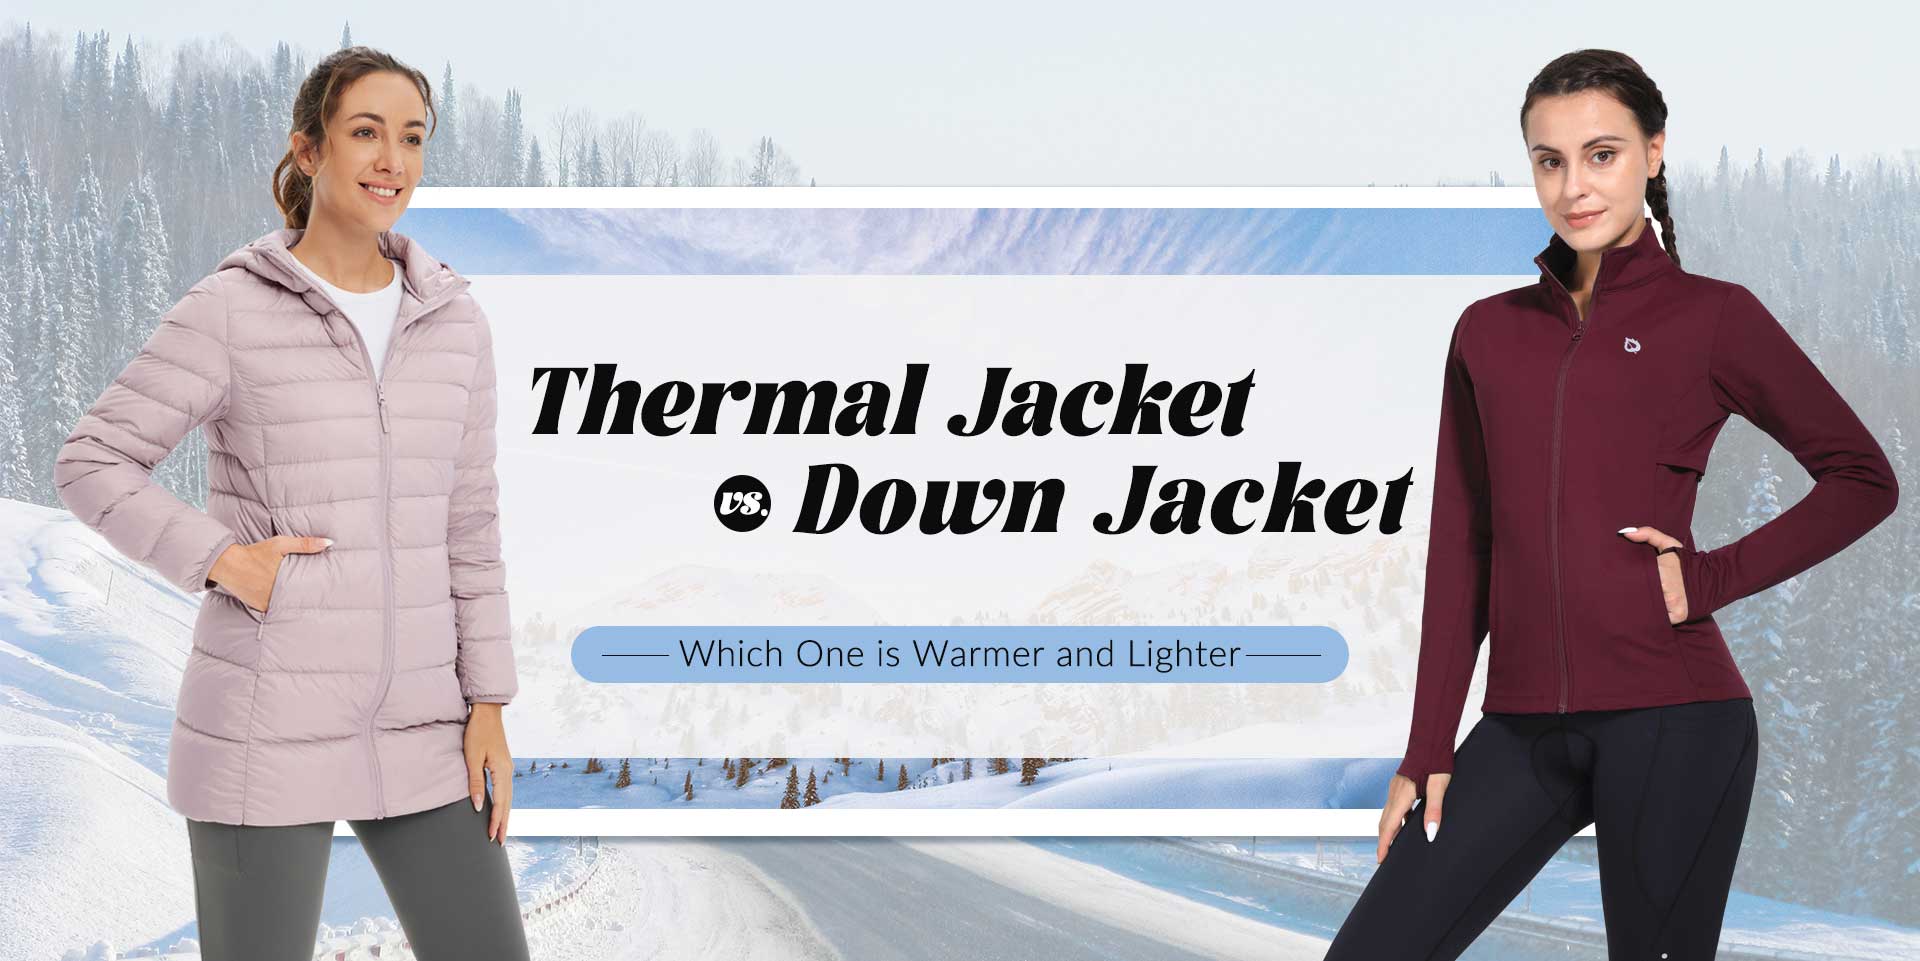 Thermal Jacket vs. Down Jacket: Which One is Warmer and Lighter?